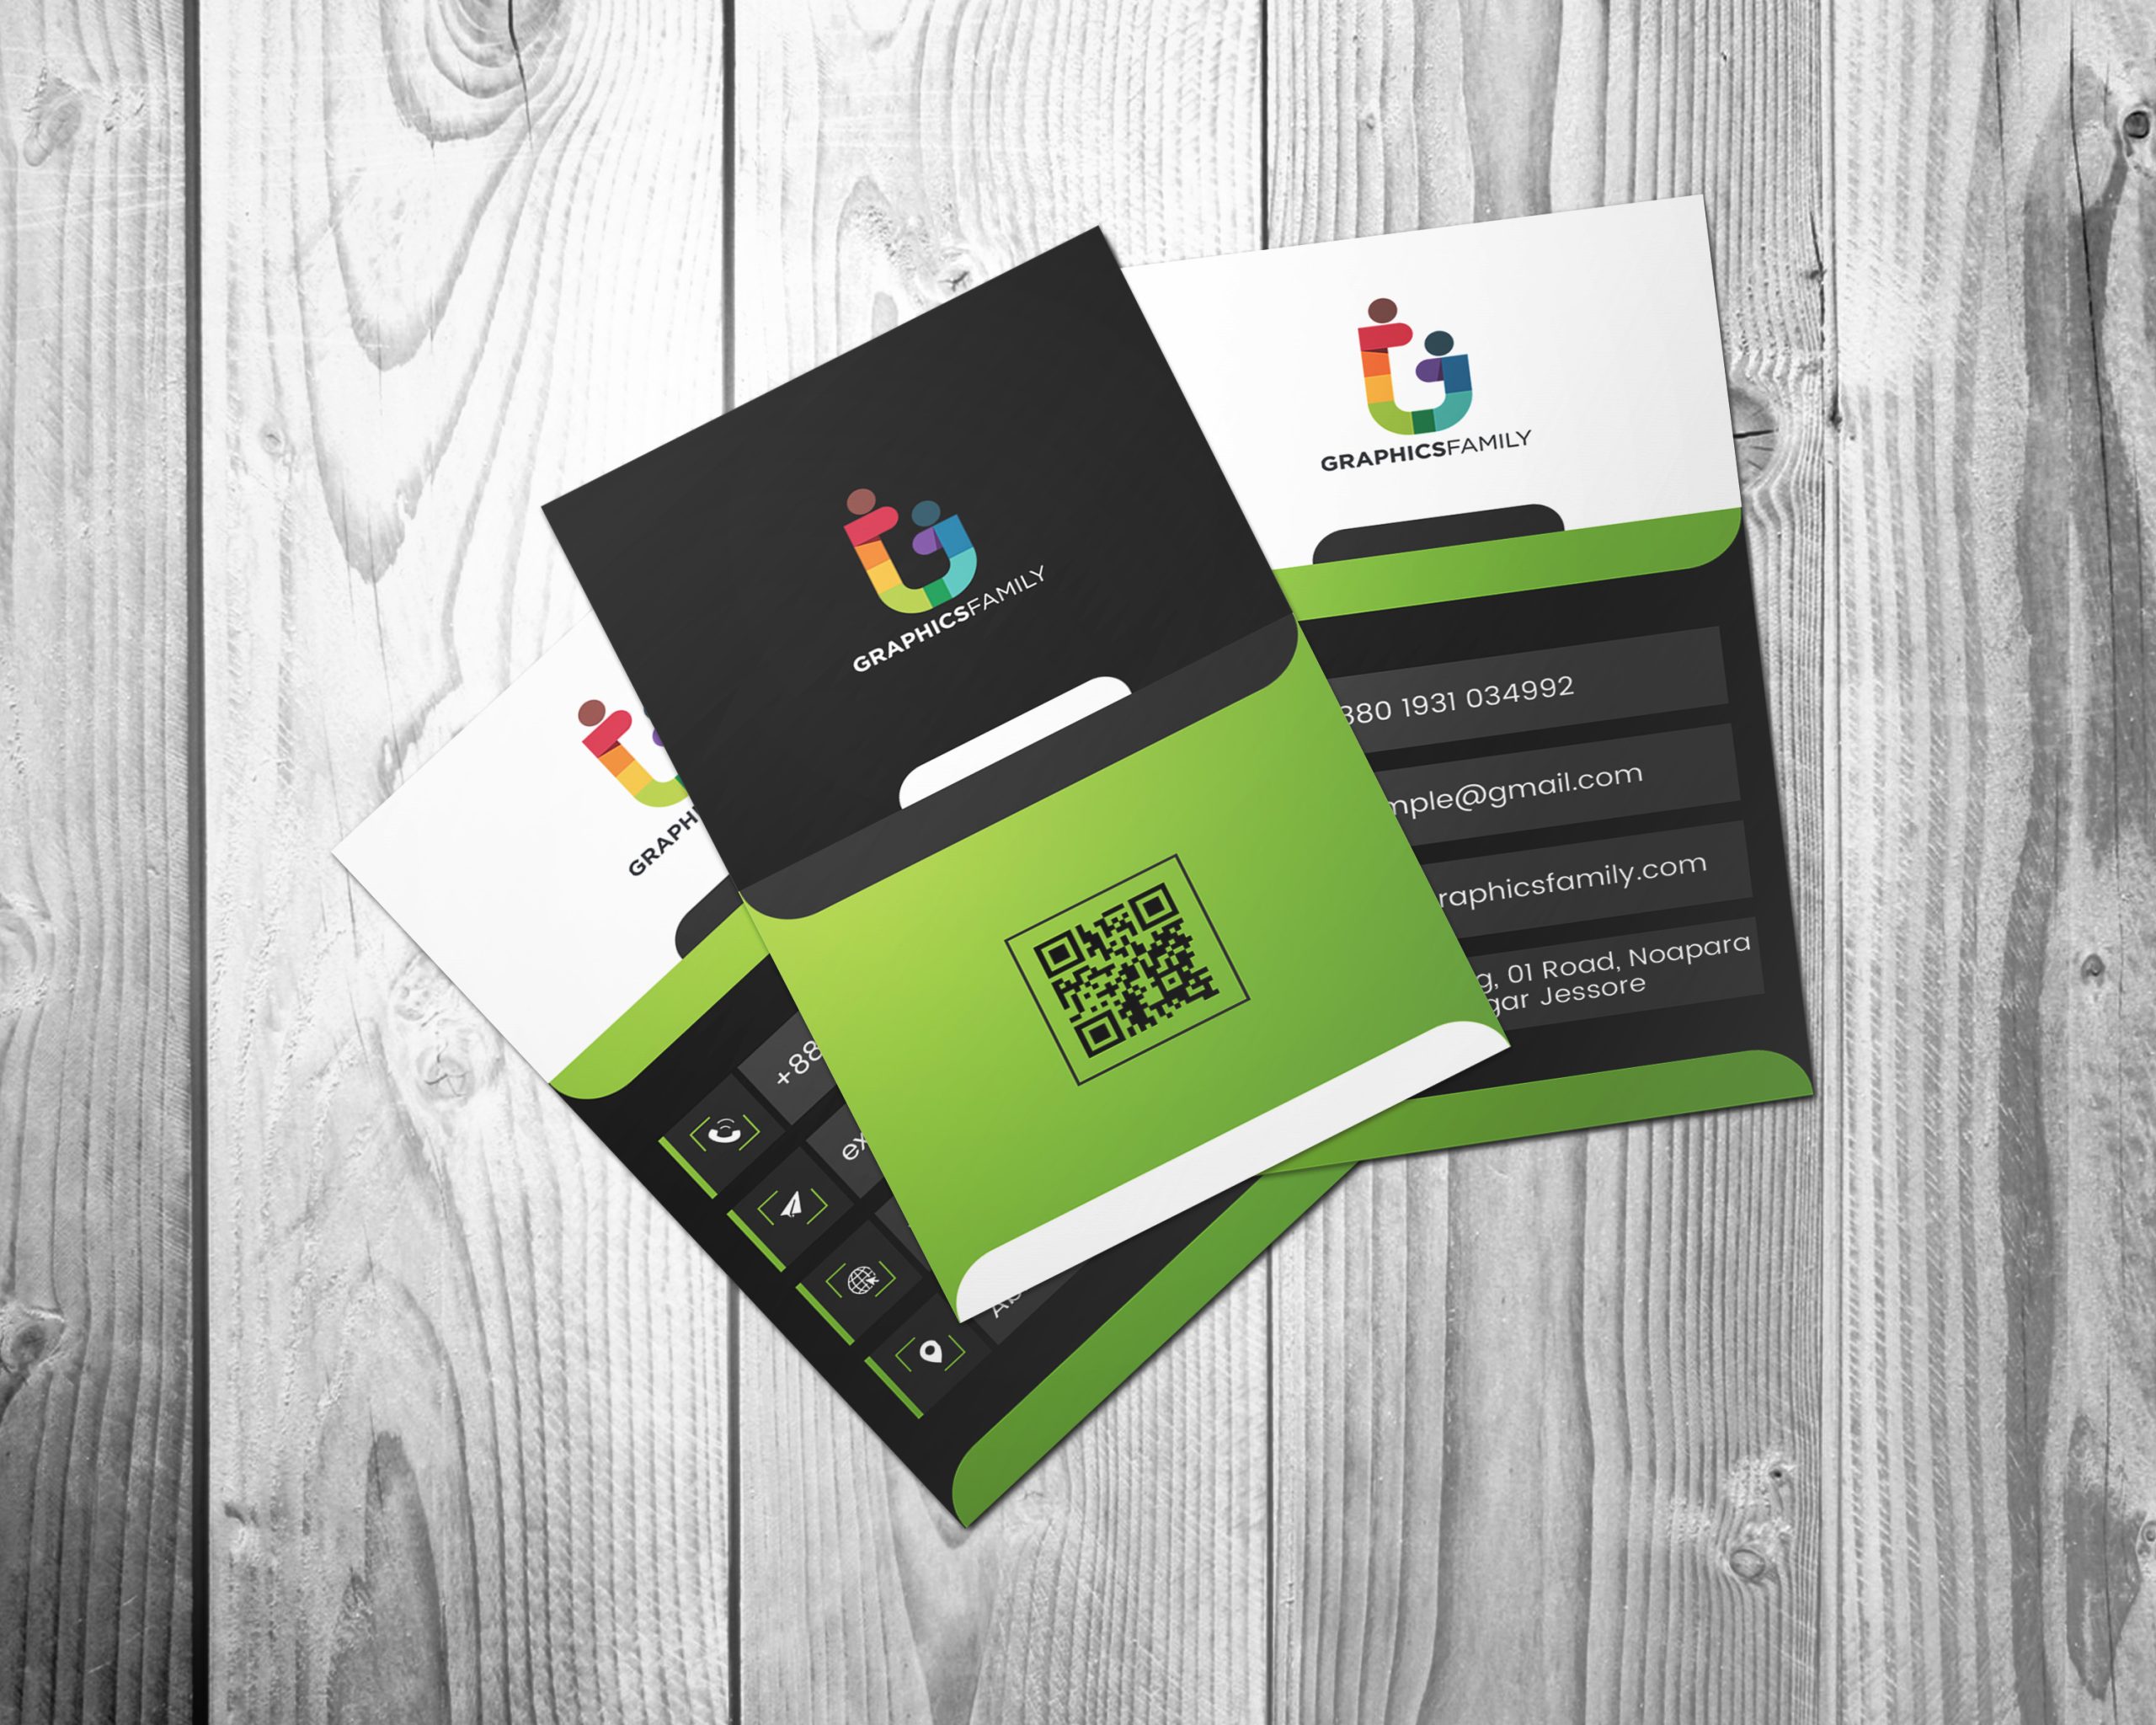 Download Visiting Card Design with Green , Black and White